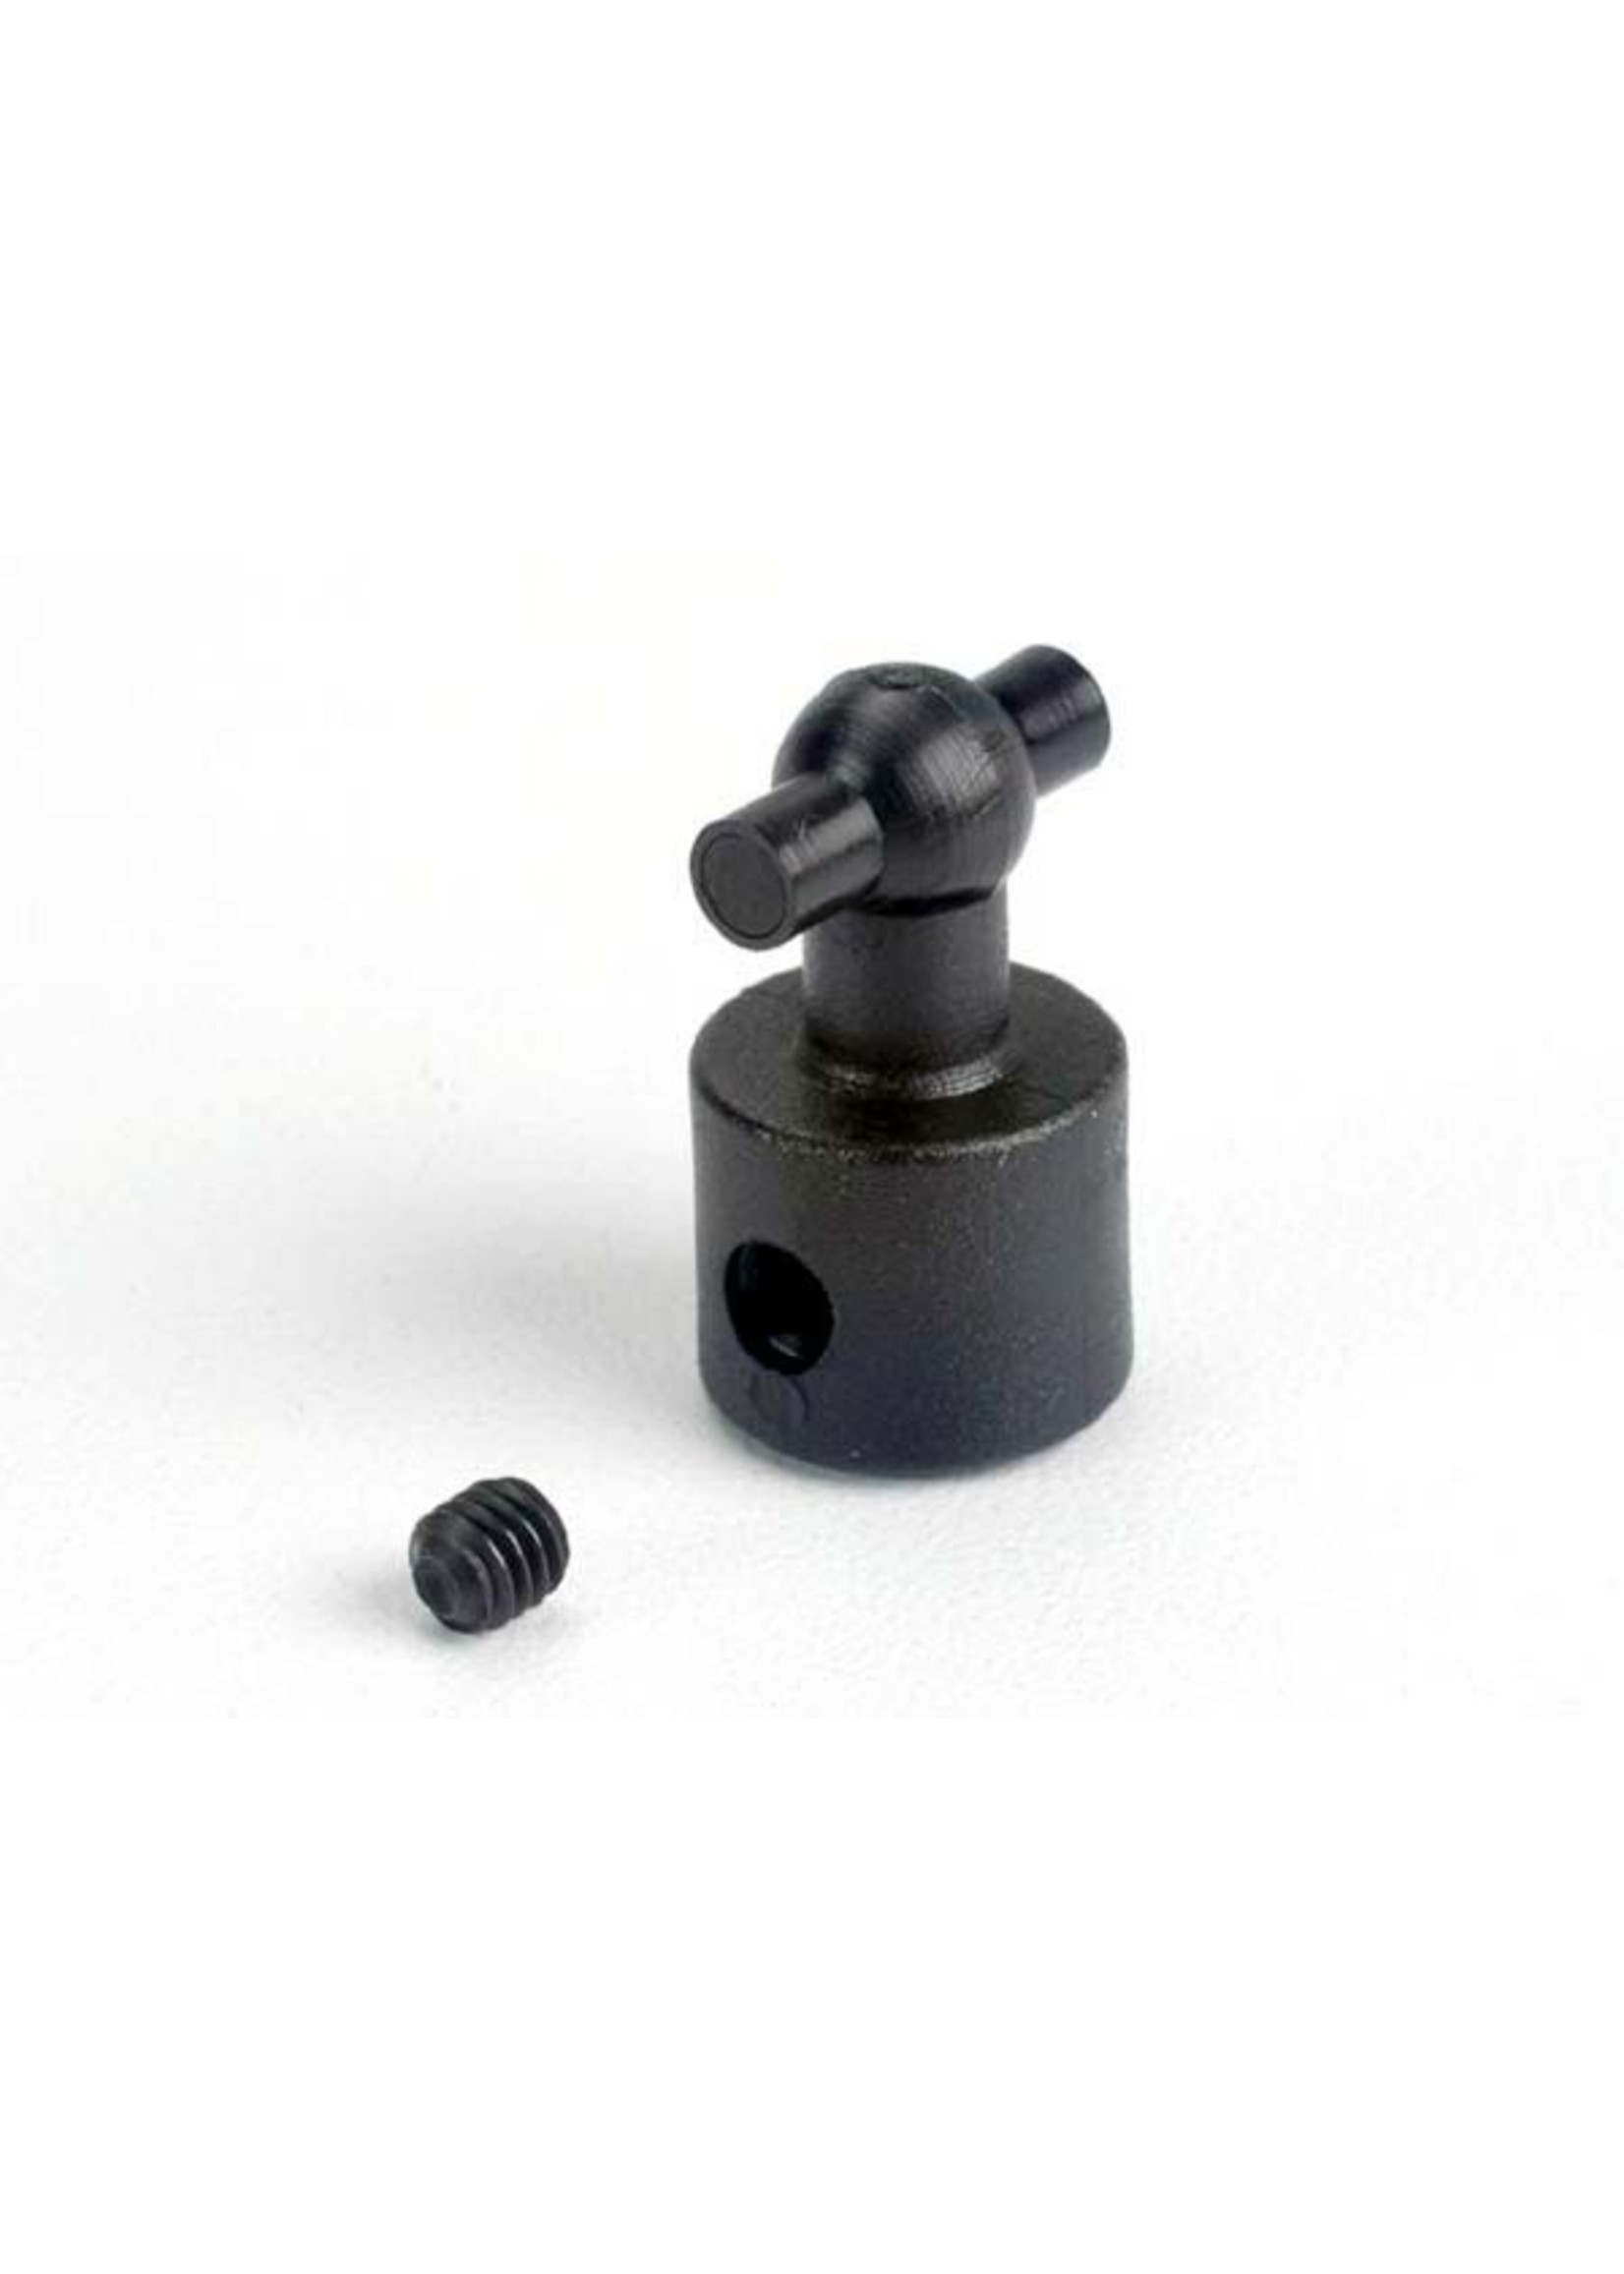 Traxxas 3827 - Motor Drive Cup with Set Screw